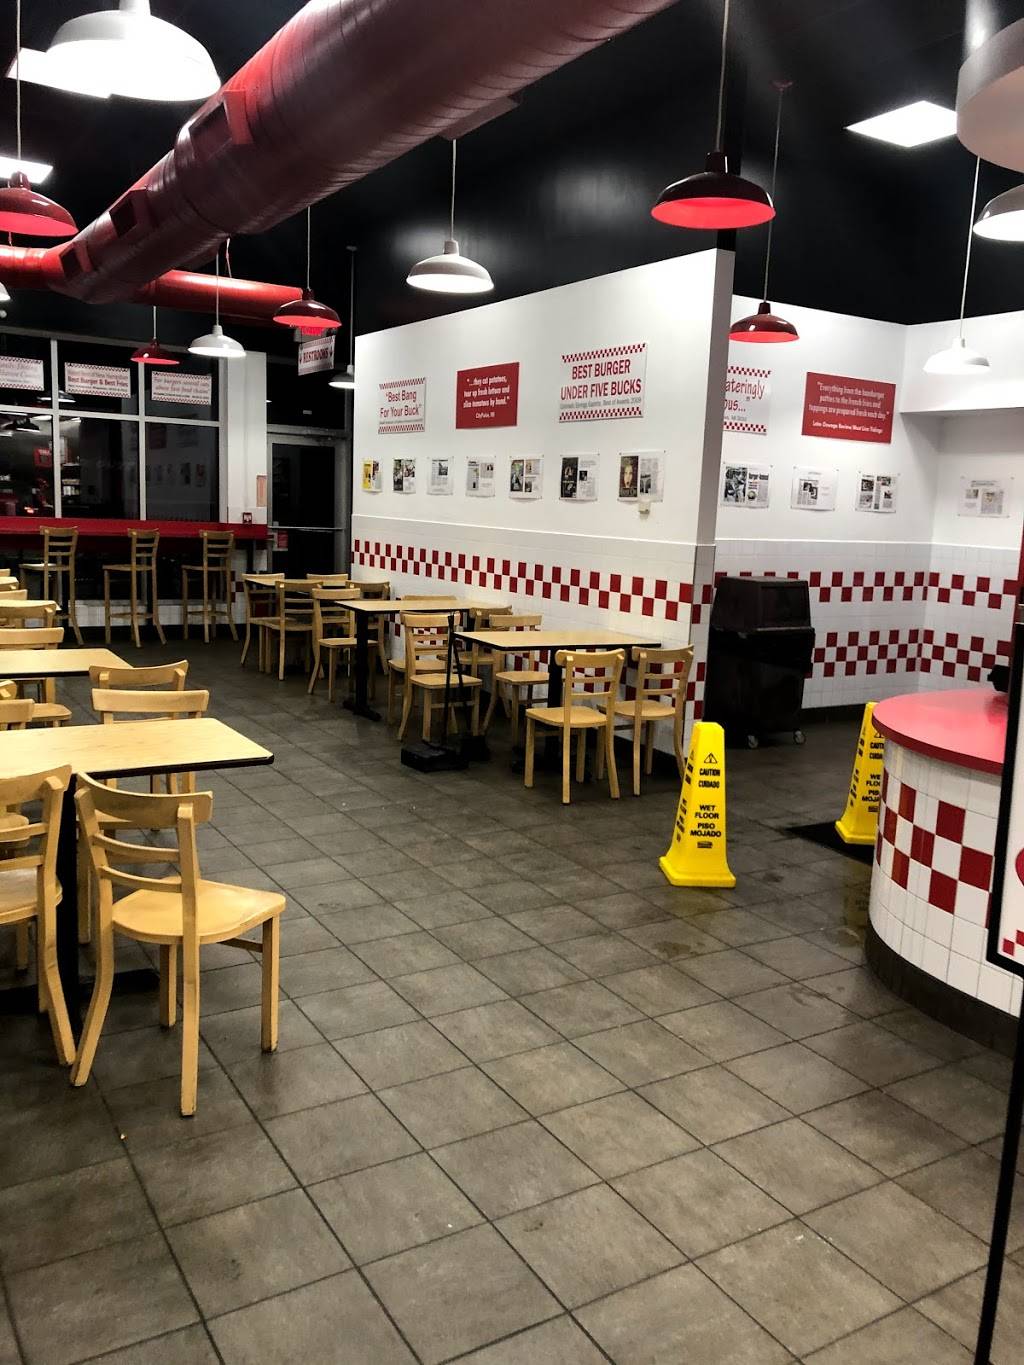 Five Guys | meal takeaway | 158 Everett Ave, Chelsea, MA 02150, USA | 6174660651 OR +1 617-466-0651